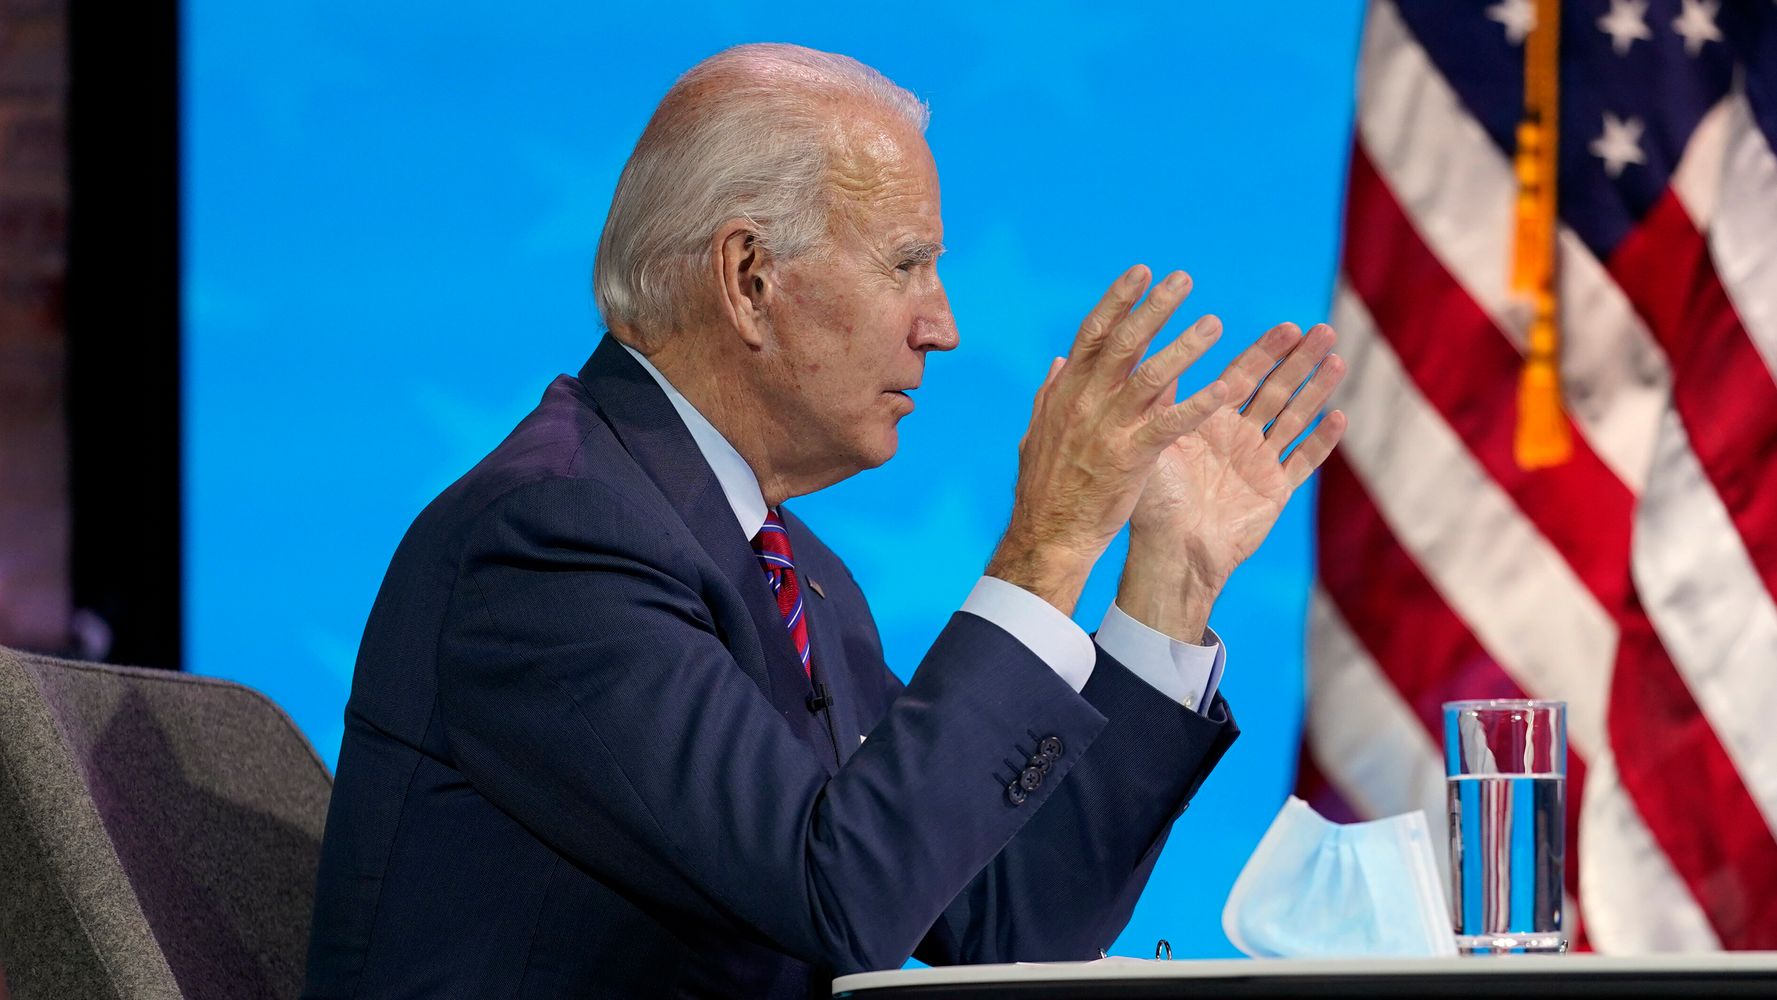 Biden’s Health Agenda Starts With Reversing Everything Trump Did In The Last 4 Years